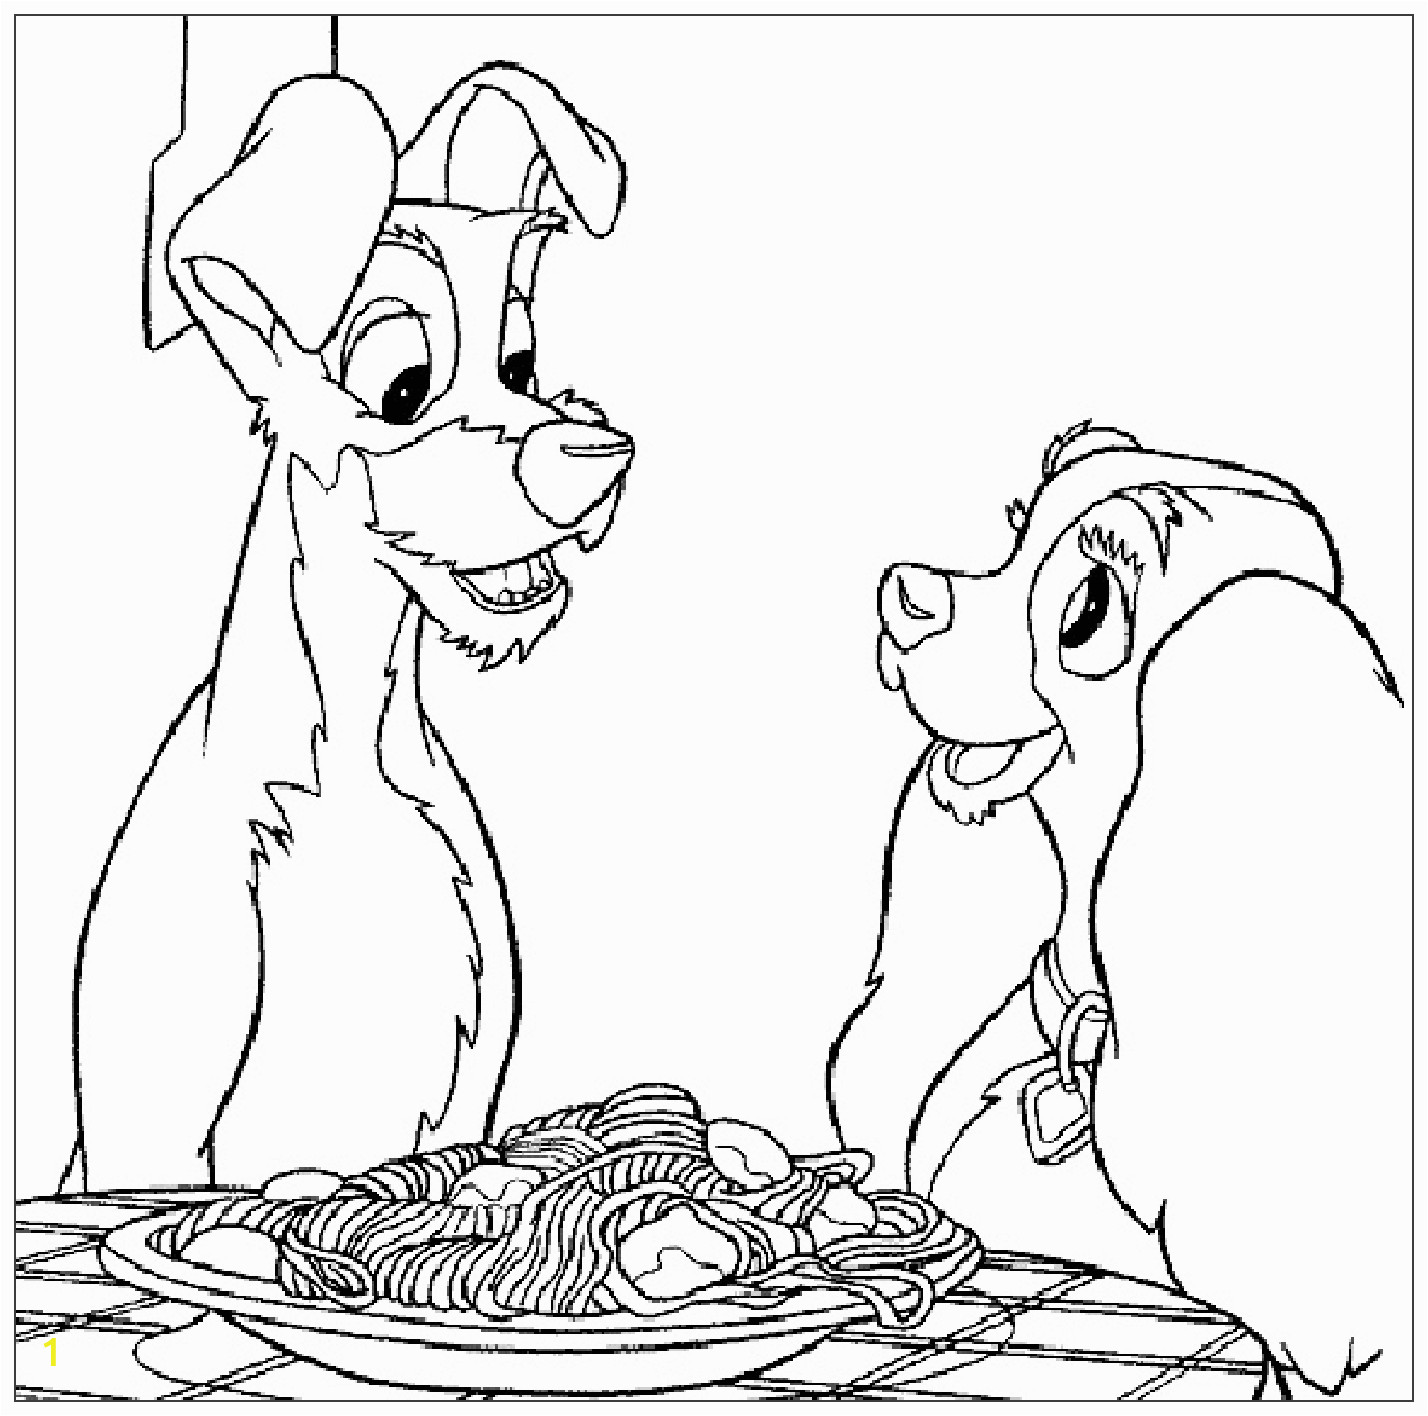 image=the lady and the tramp Coloring for kids the lady and the tramp 2